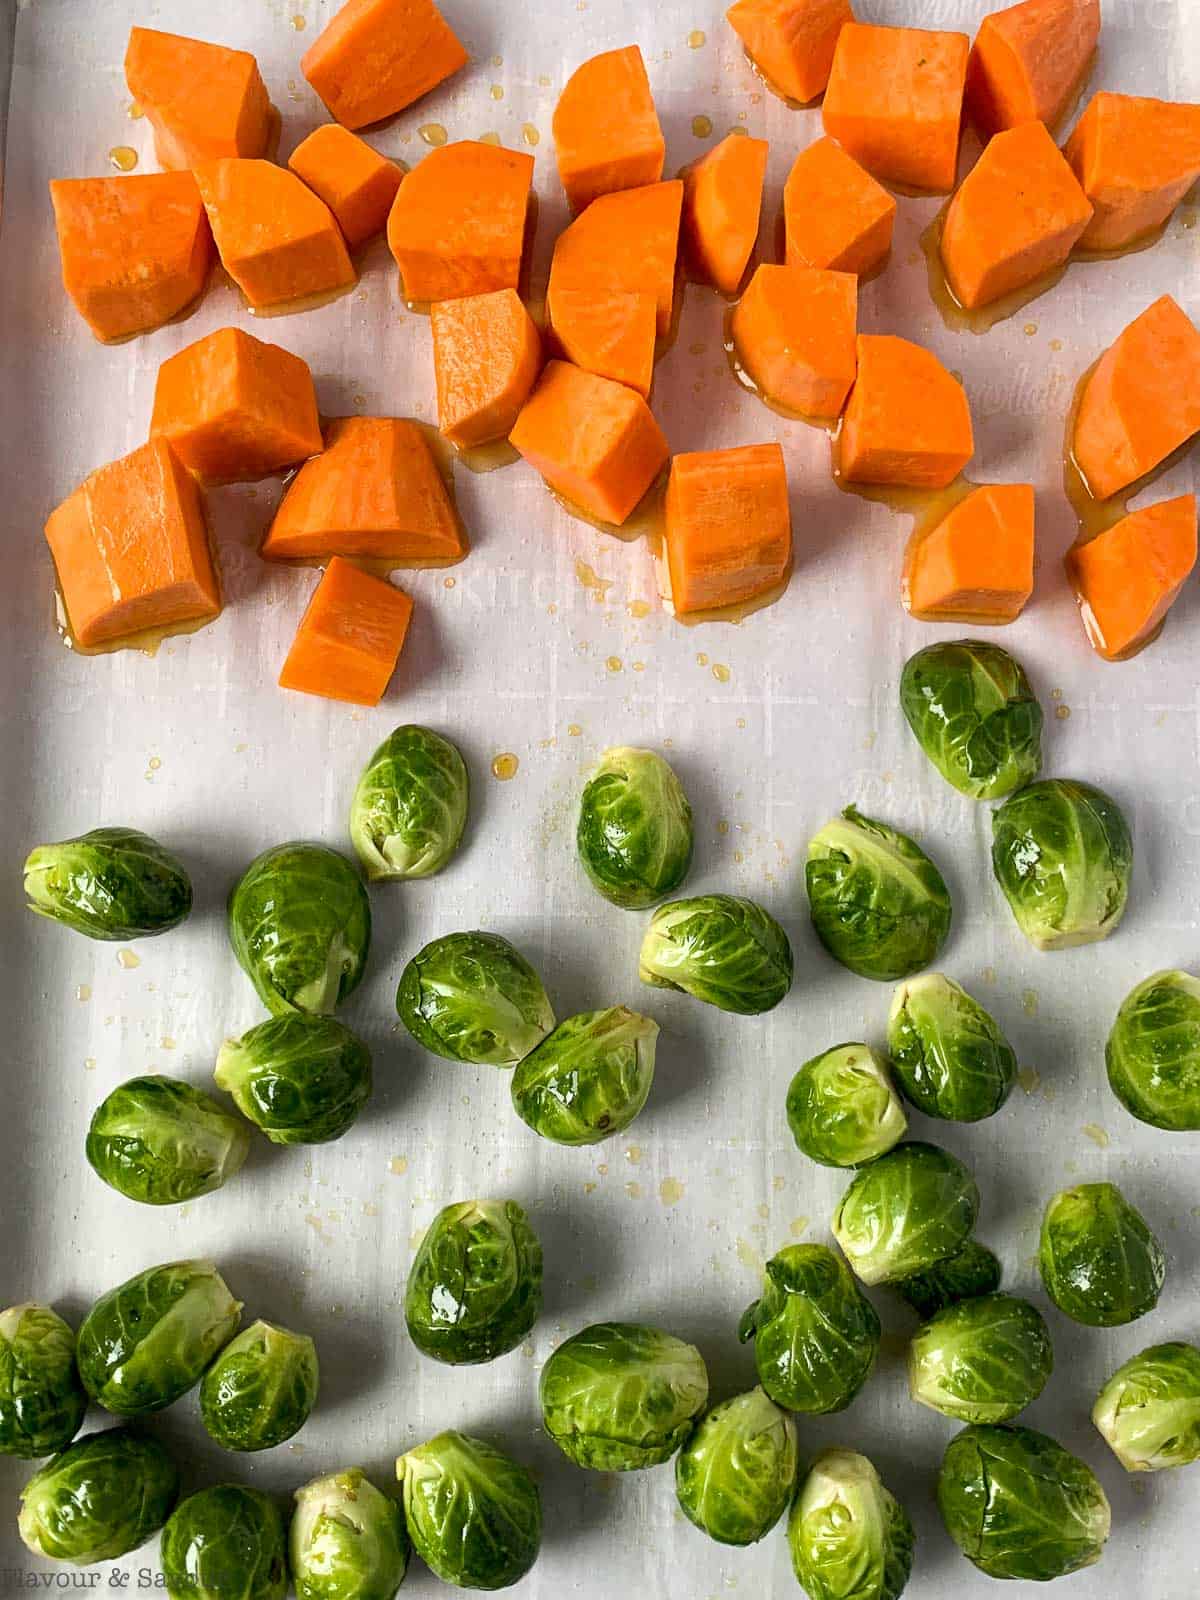 sweet potatoes and Brussels sprouts on a sheet pan